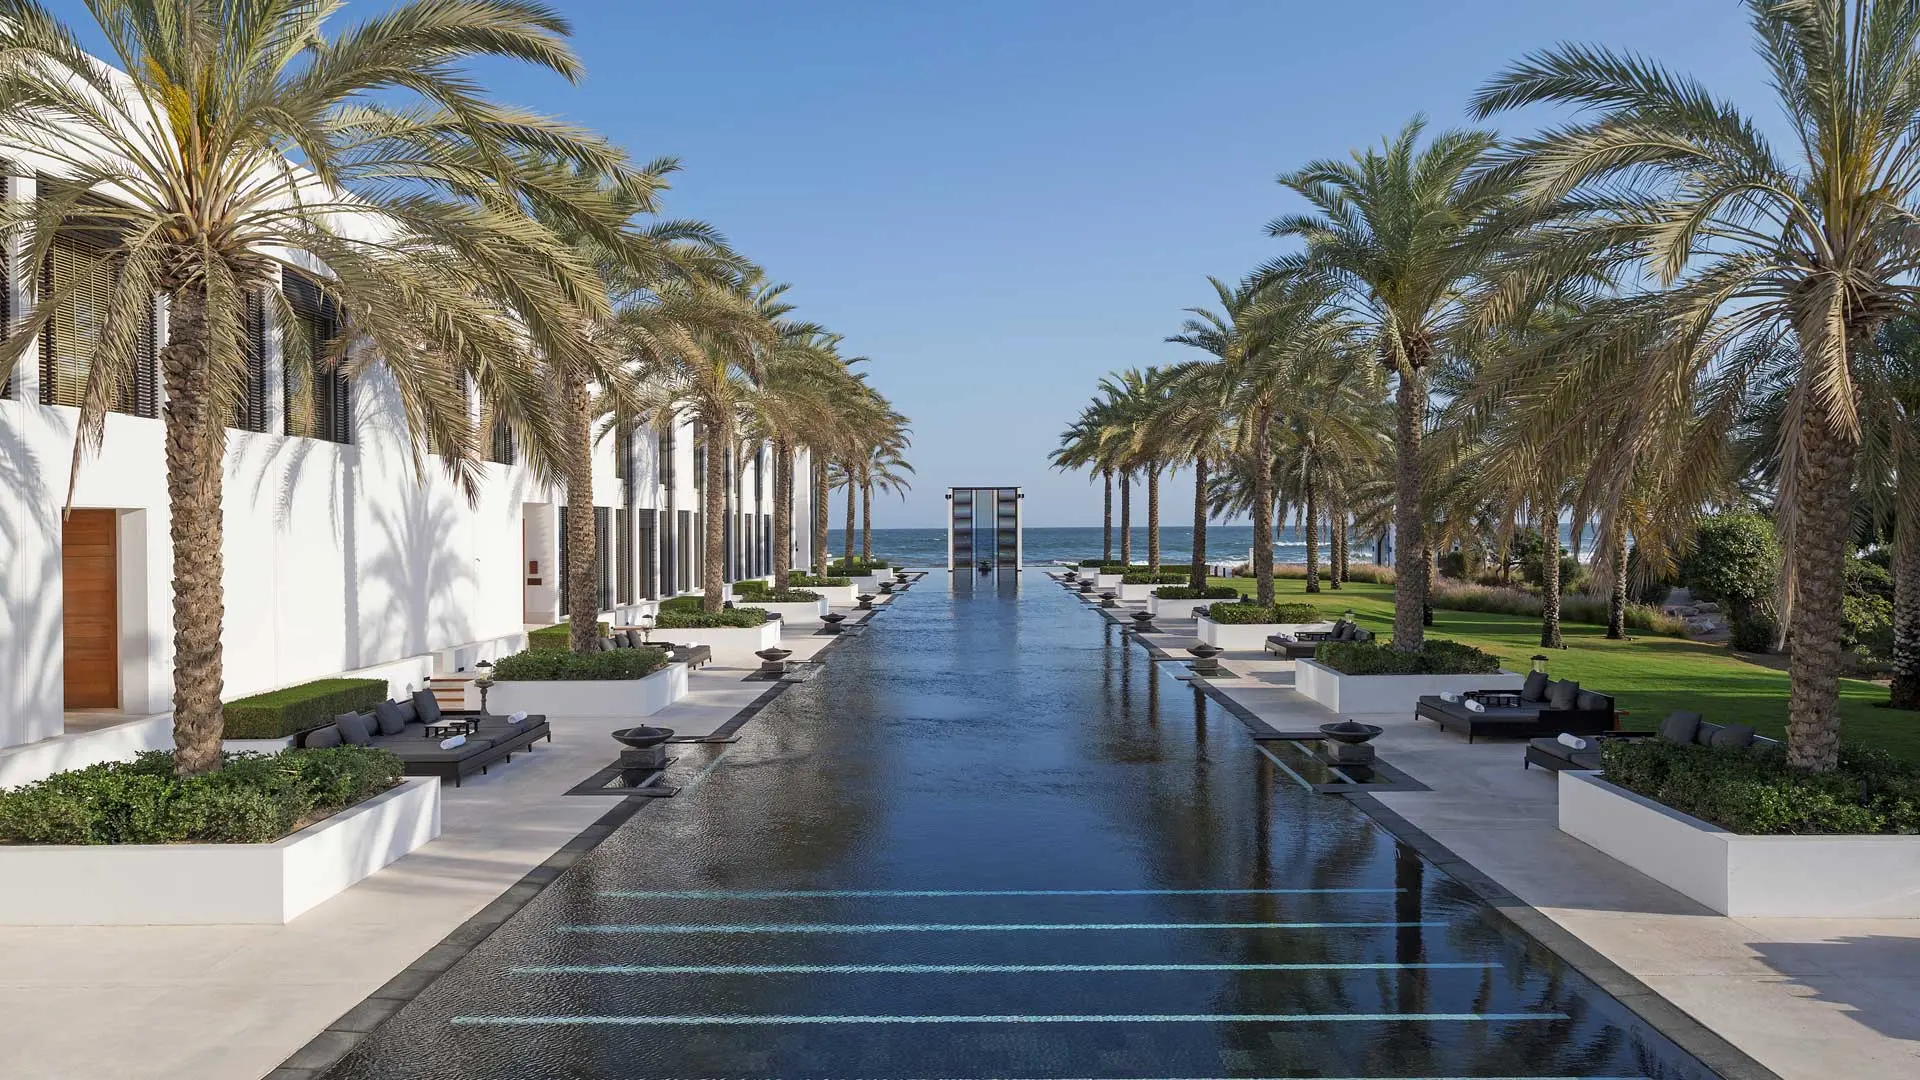 Hotel review Service & Facilities' - The Chedi Muscat - 3